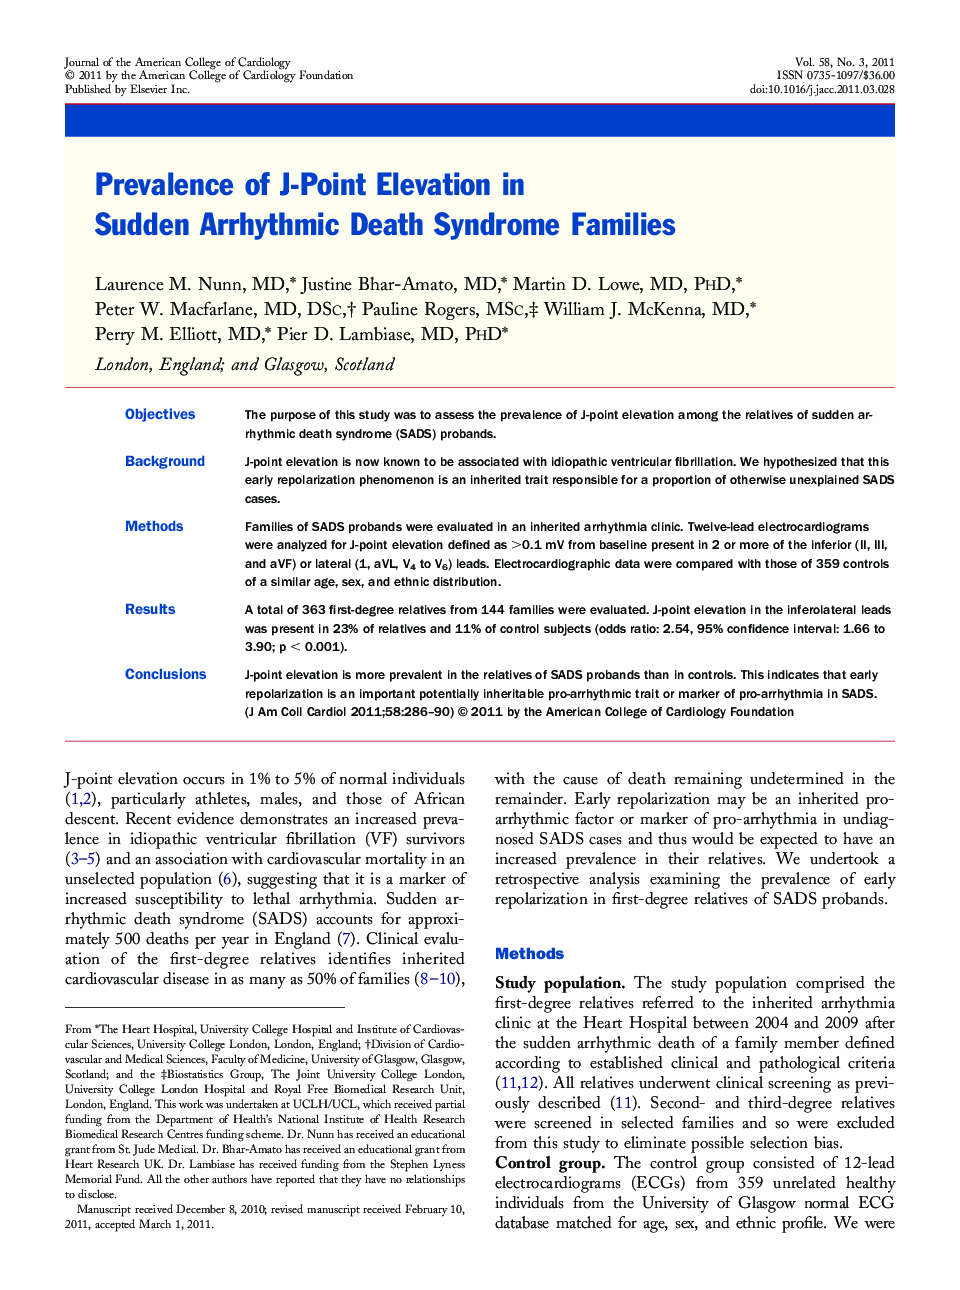 Prevalence of J-Point Elevation in Sudden Arrhythmic Death Syndrome Families 